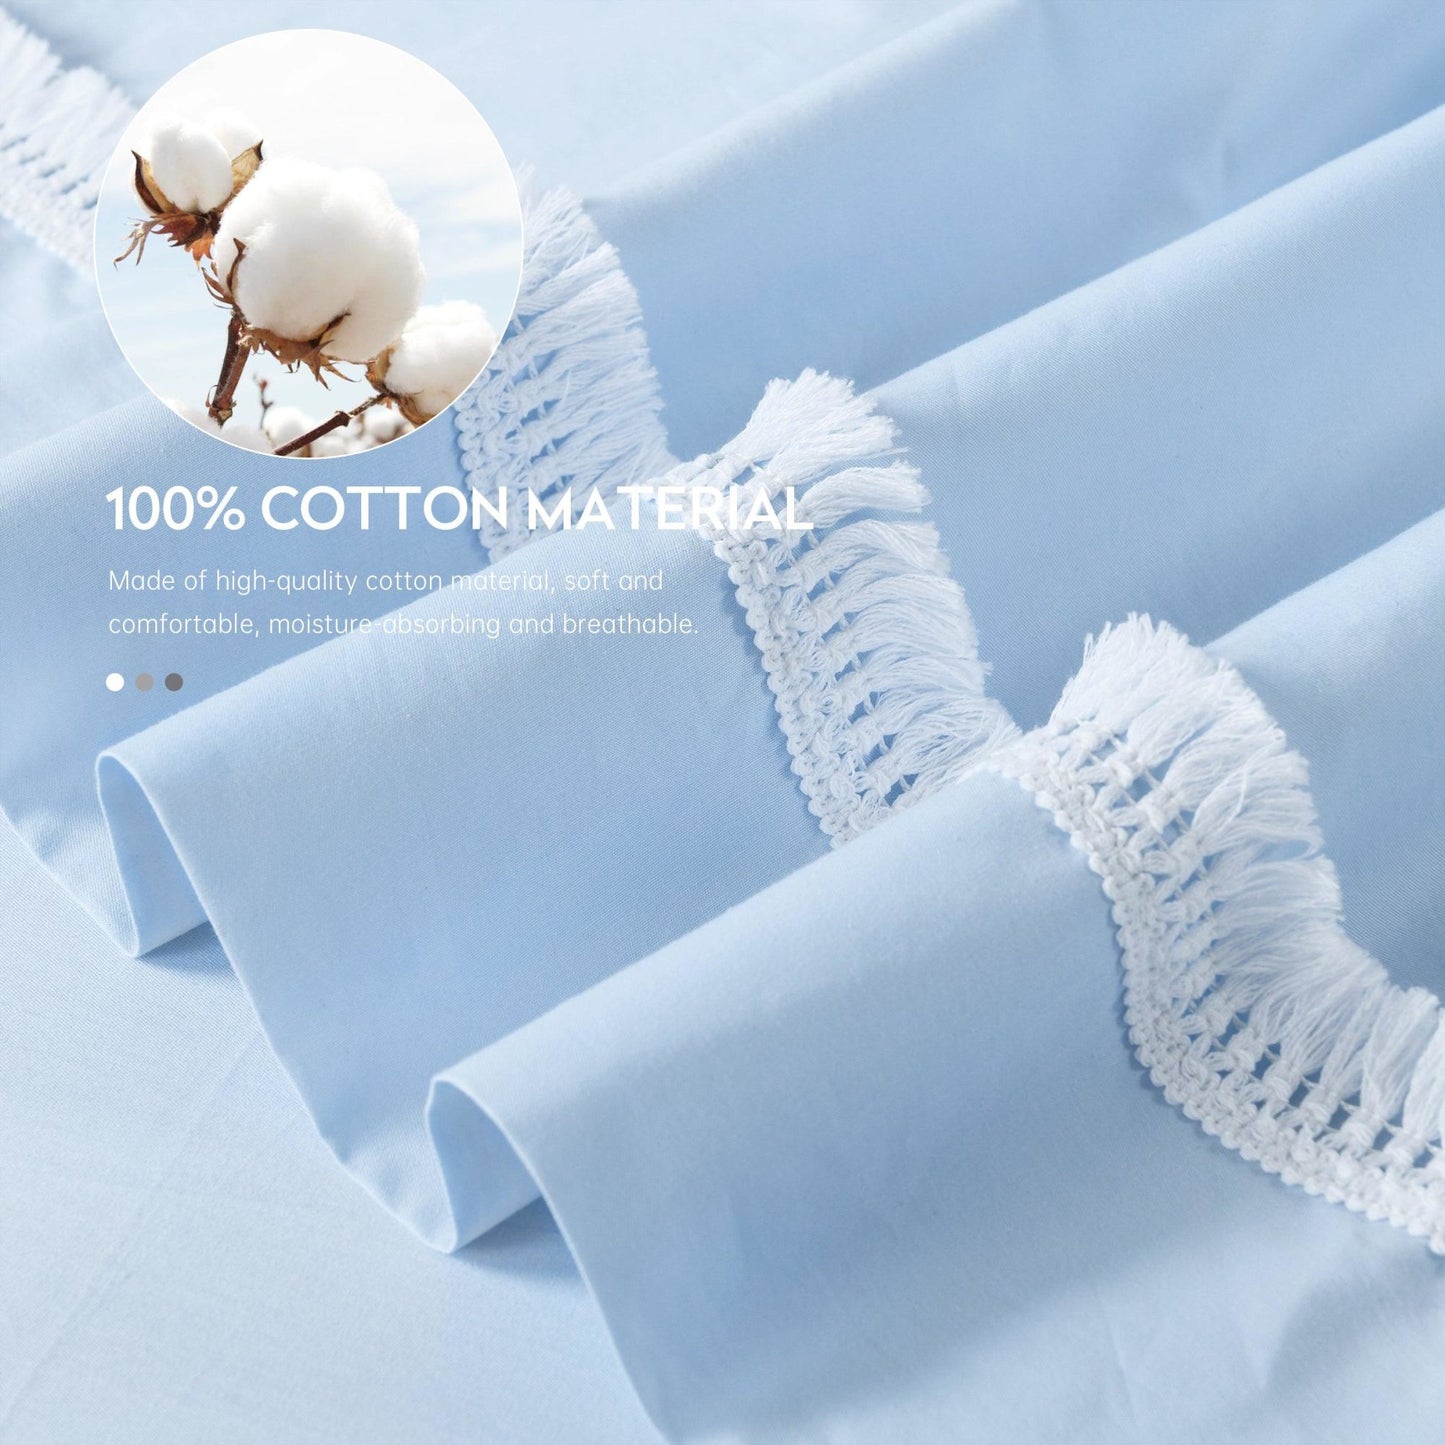 100% Cotton Bed Sheet Set 400TC Macrame Fitted Flat Sheet with Pillowcases, Twin/Full/Queen/King Size